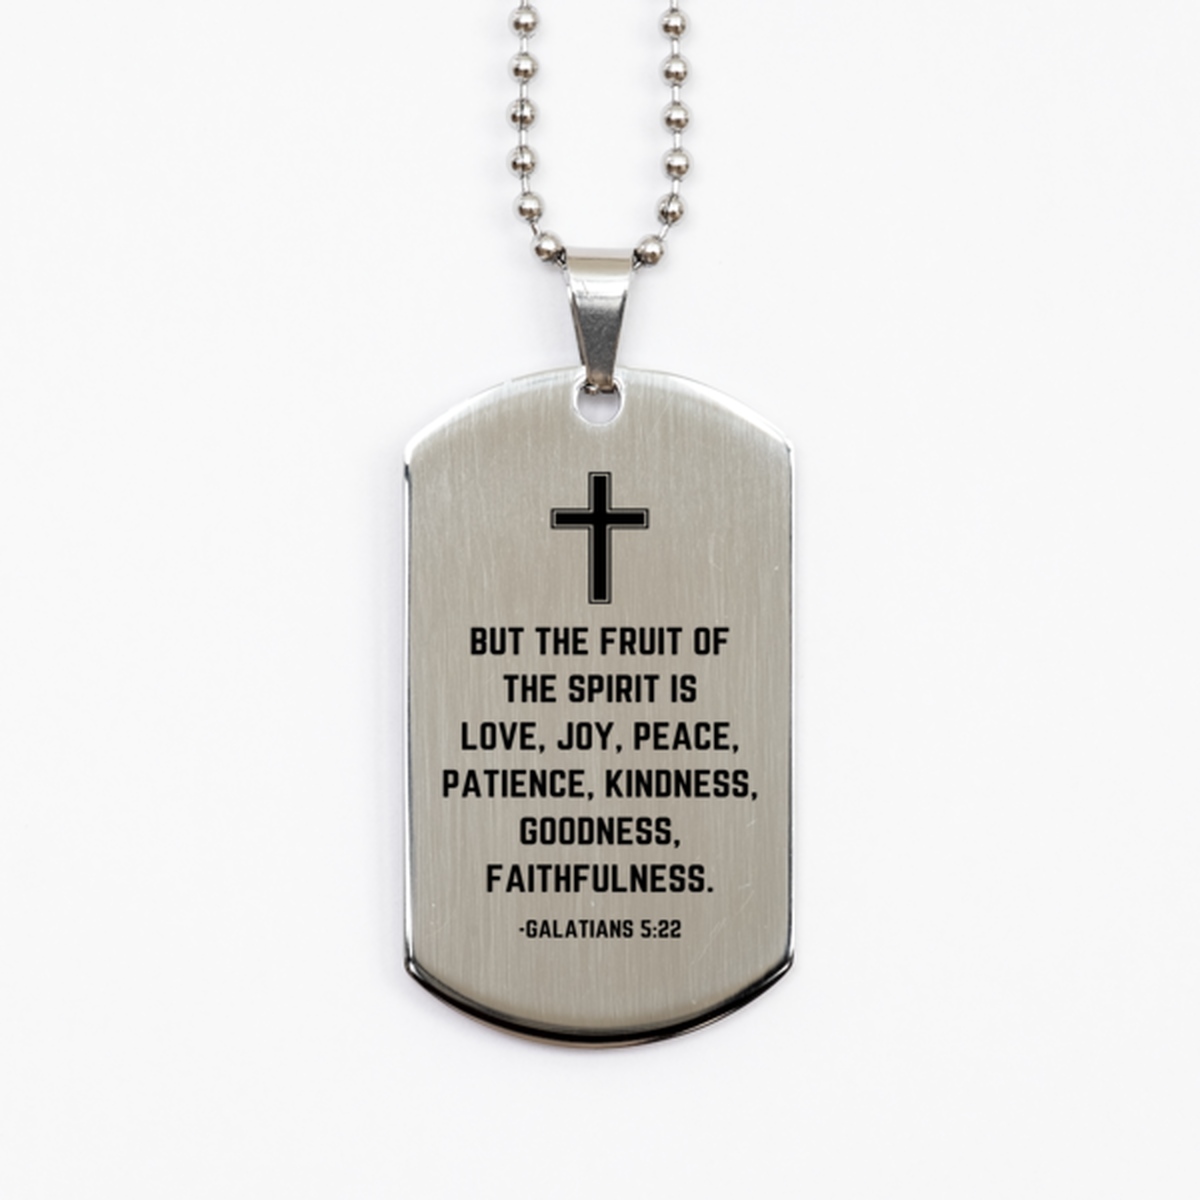 Baptism Gifts For Teenage Boys Girls, Christian Bible Verse Silver Dog Tag, But the fruit of the Spirit, Confirmation Gifts, Bible Verse Necklace for Son, Godson, Grandson, Nephew